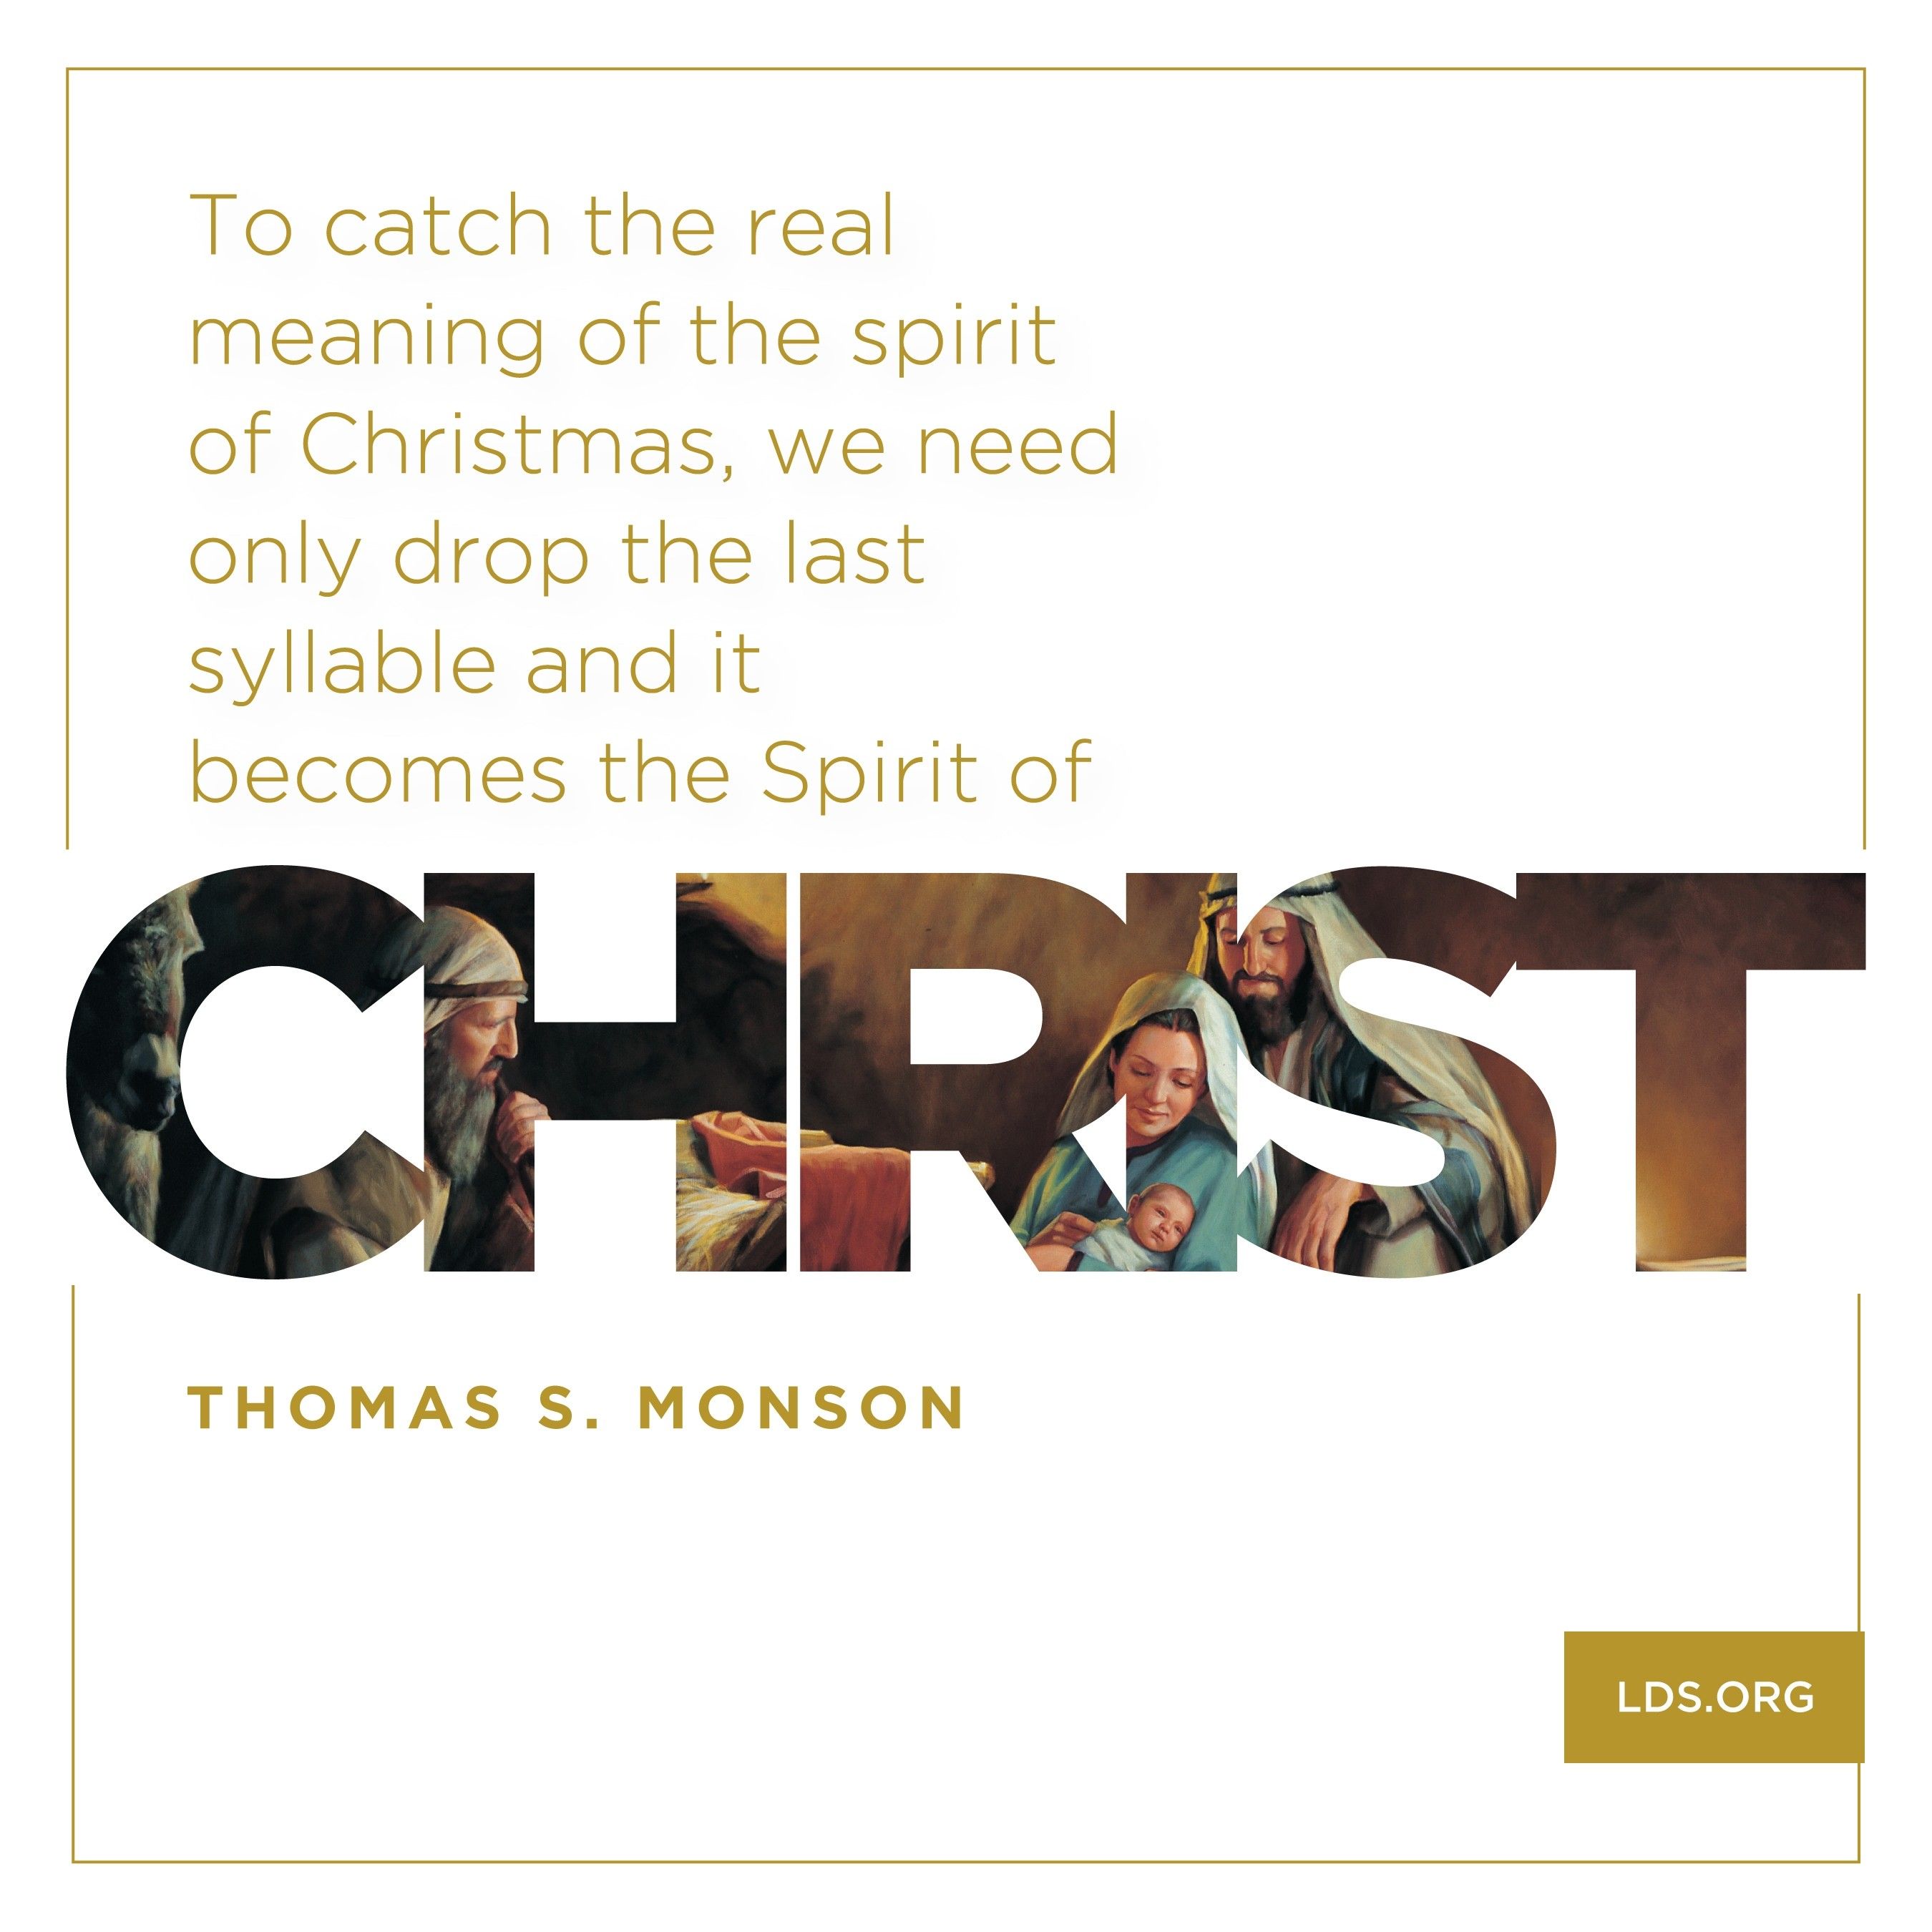 “To catch the real meaning of the spirit of Christmas, we need only drop the last syllable and it becomes the Spirit of Christ.”—President Thomas S. Monson, “The Real Joy of Christmas”